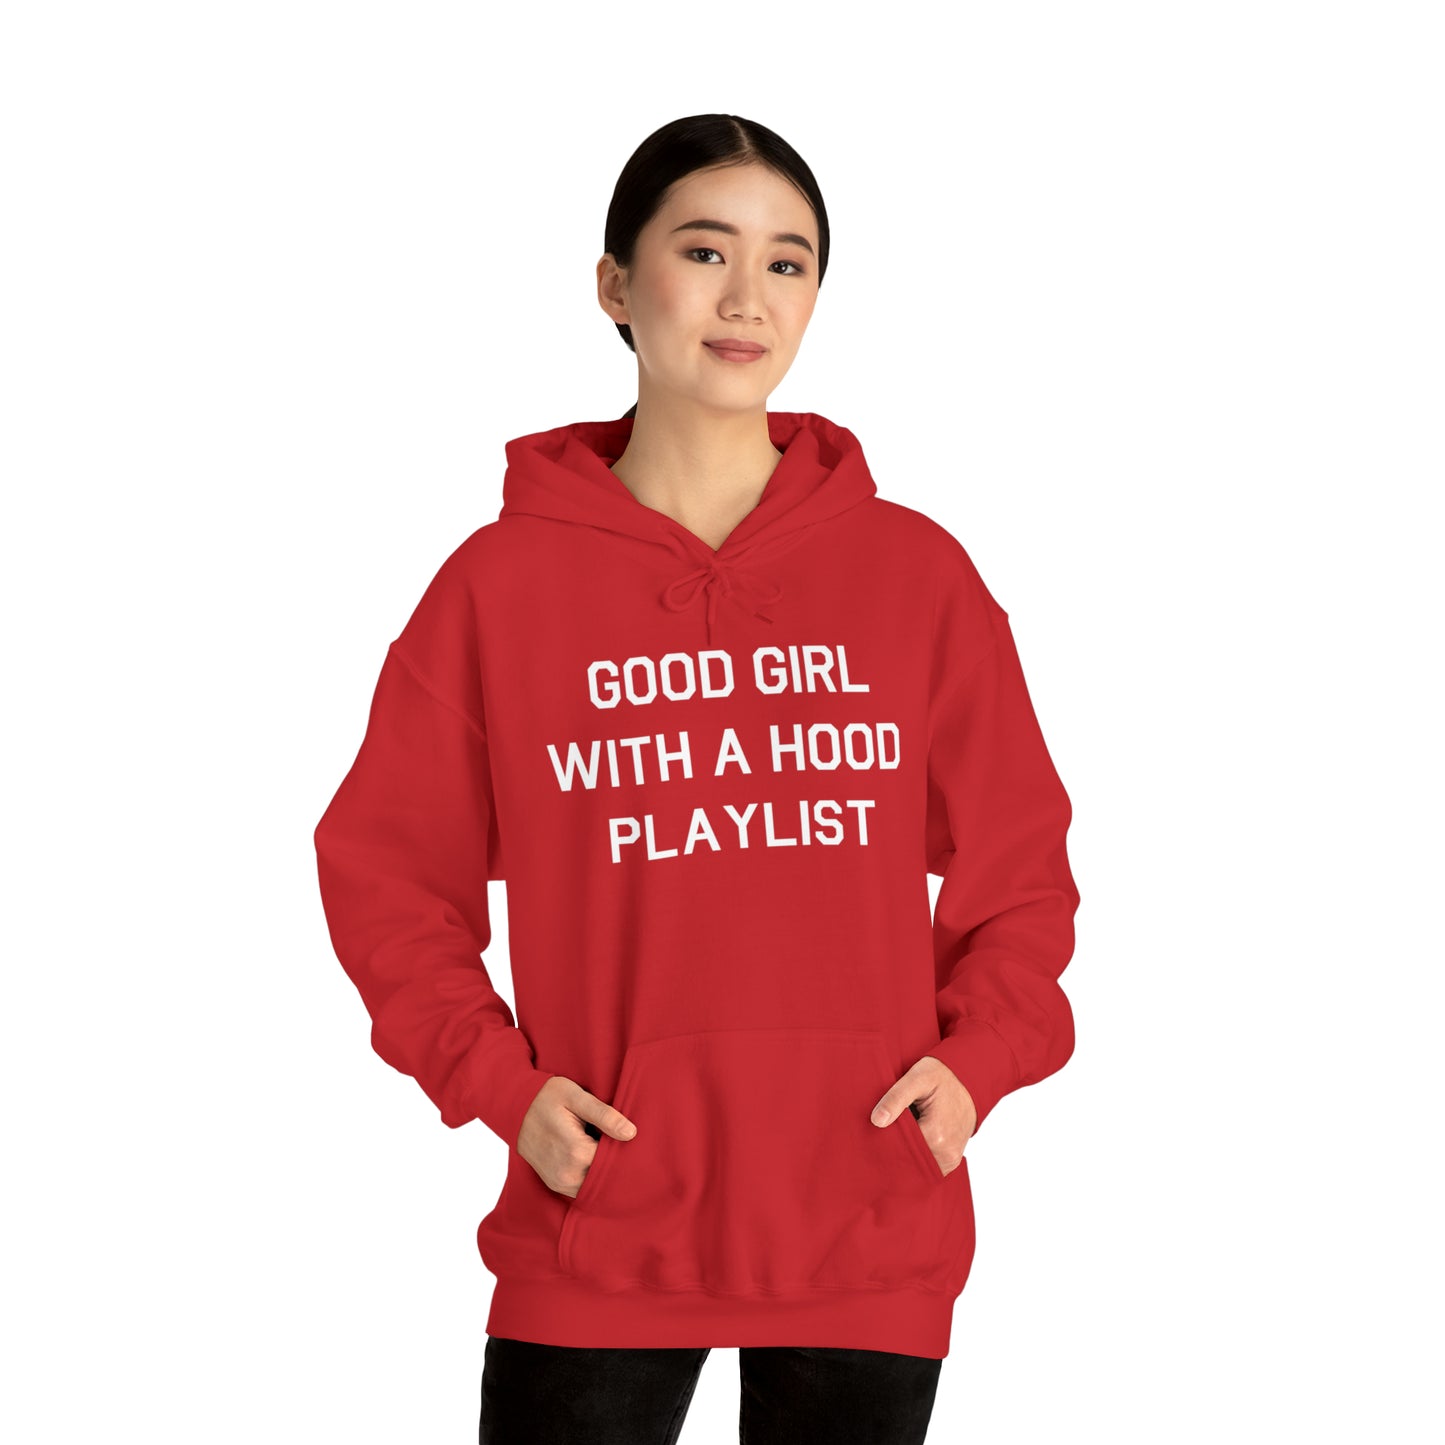 Good Girl With a Hood Playlist Hoodie Great Gift for a Good Girl With a Hood Playlist Sweatshirt